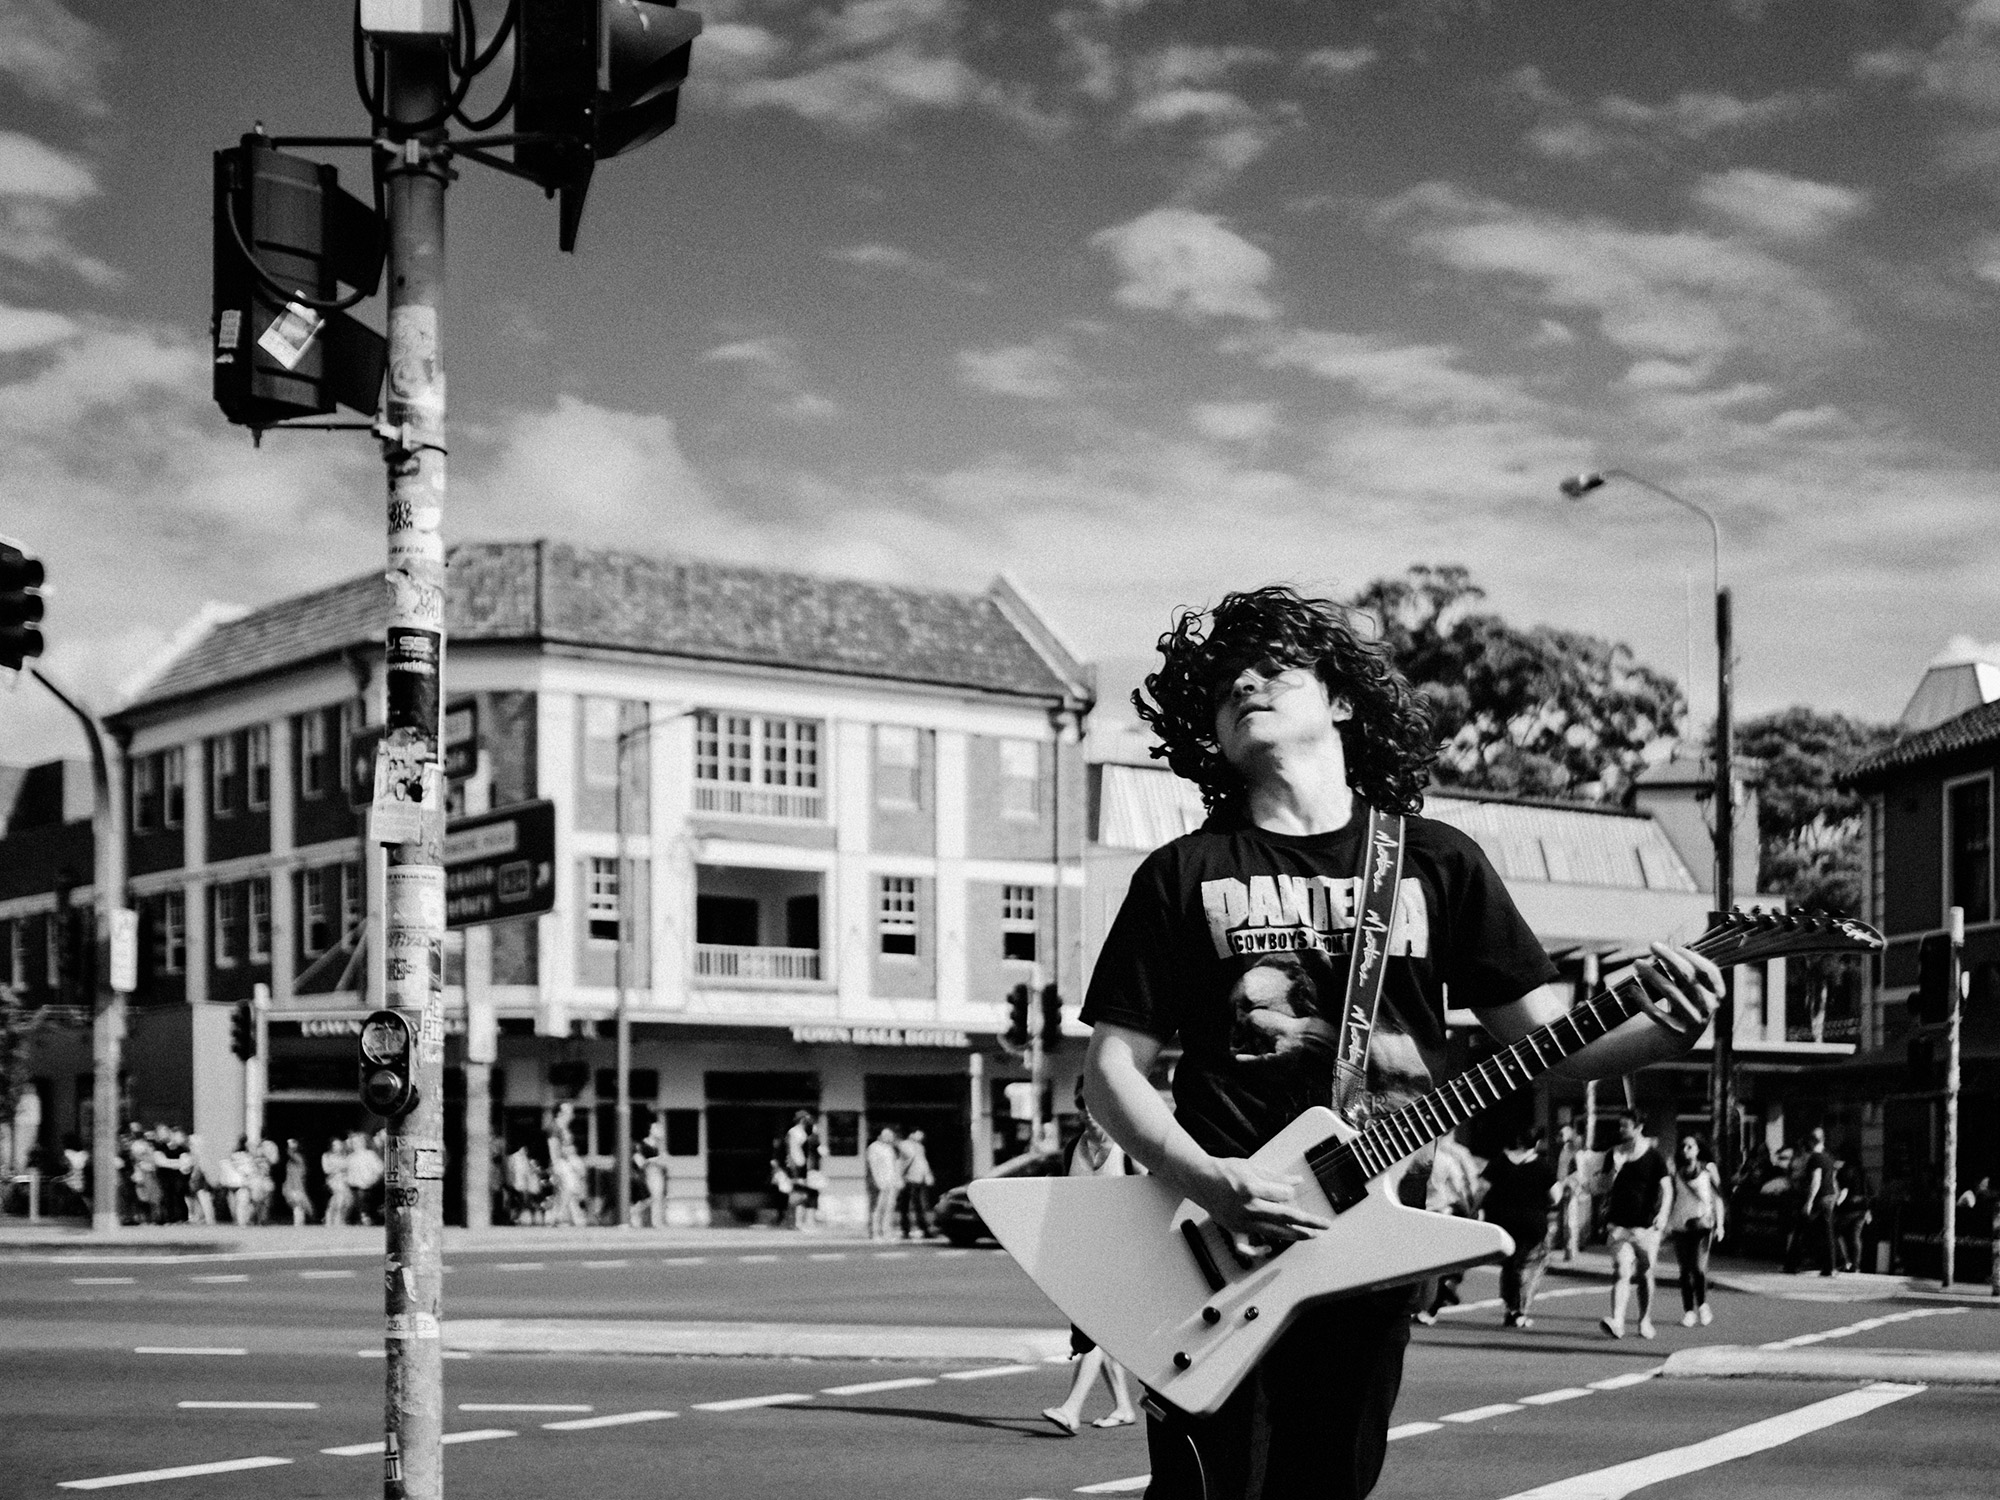 A boy plays metal music in a Pantera t-shirt on the street in Sydney, Australia, photographed by Todd Spoth.